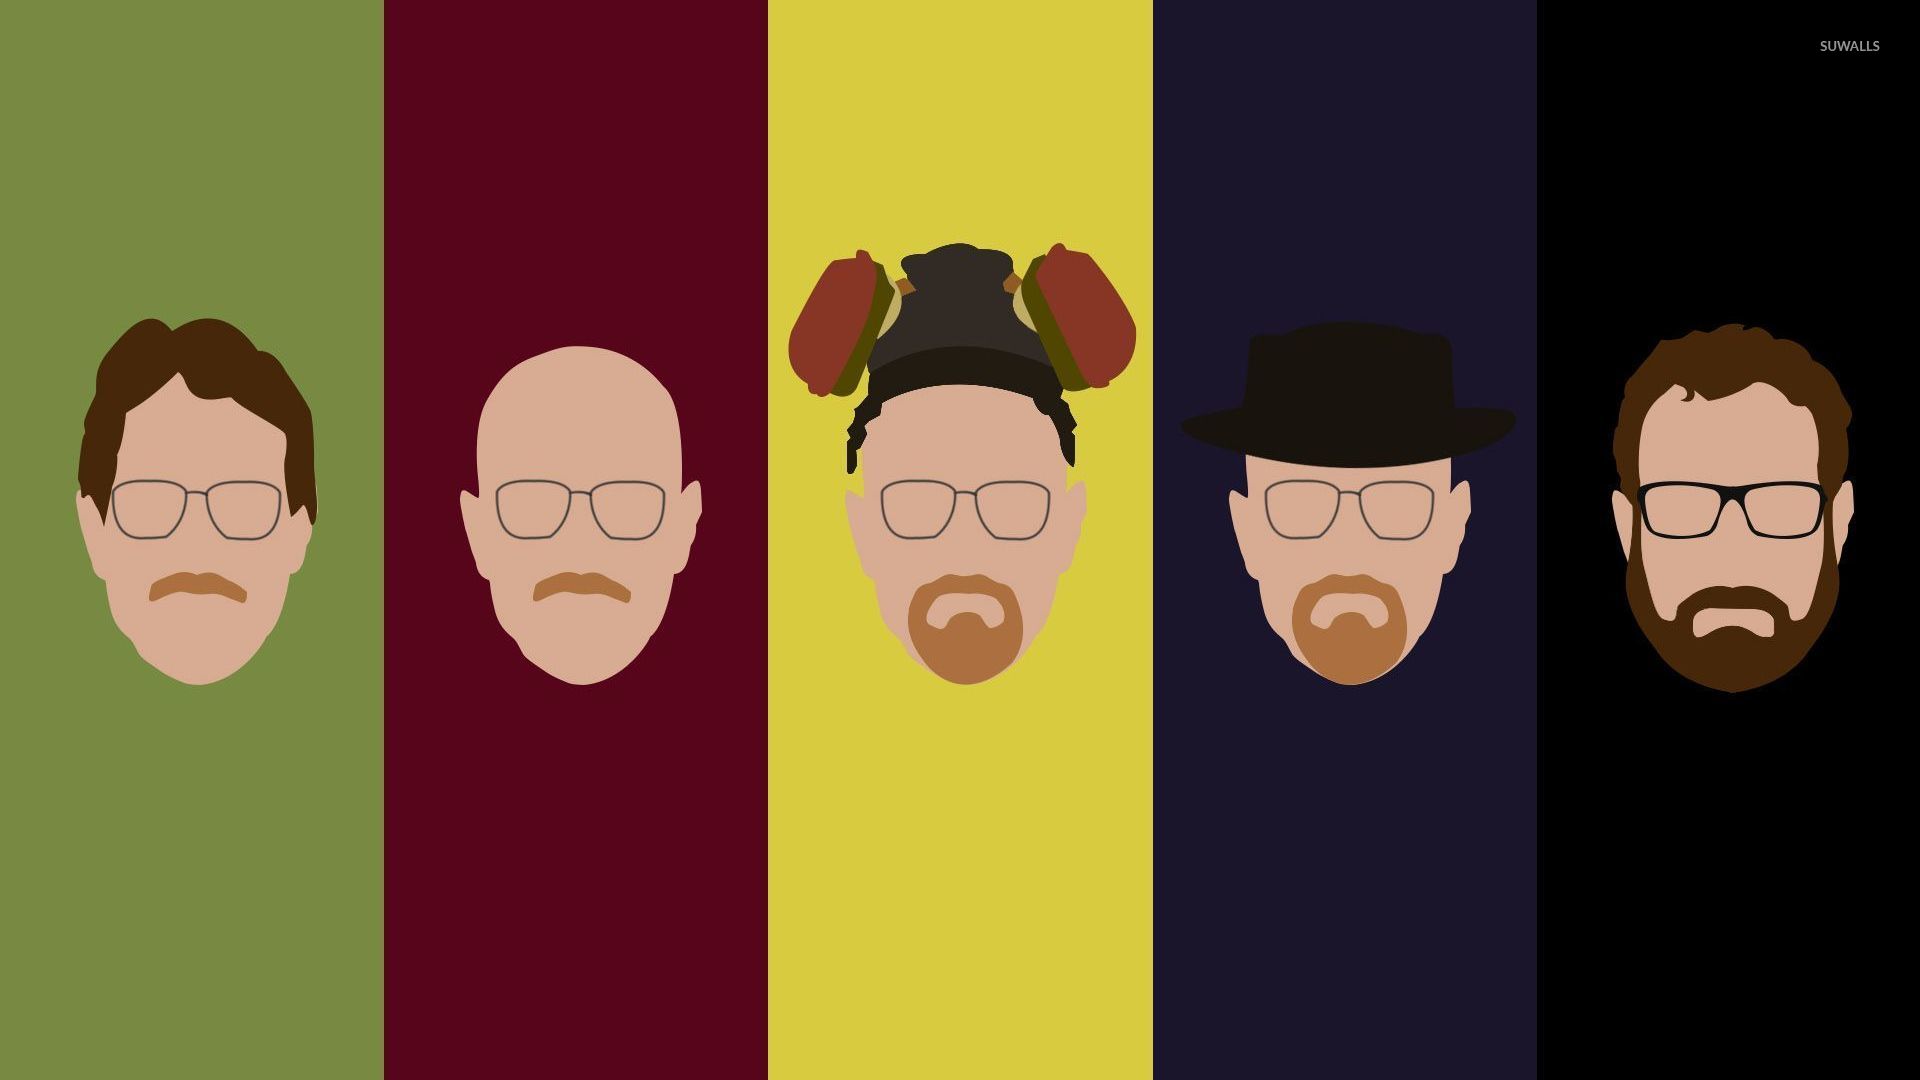 Evolution of Walter White wallpaper - Minimalistic wallpapers - #29286